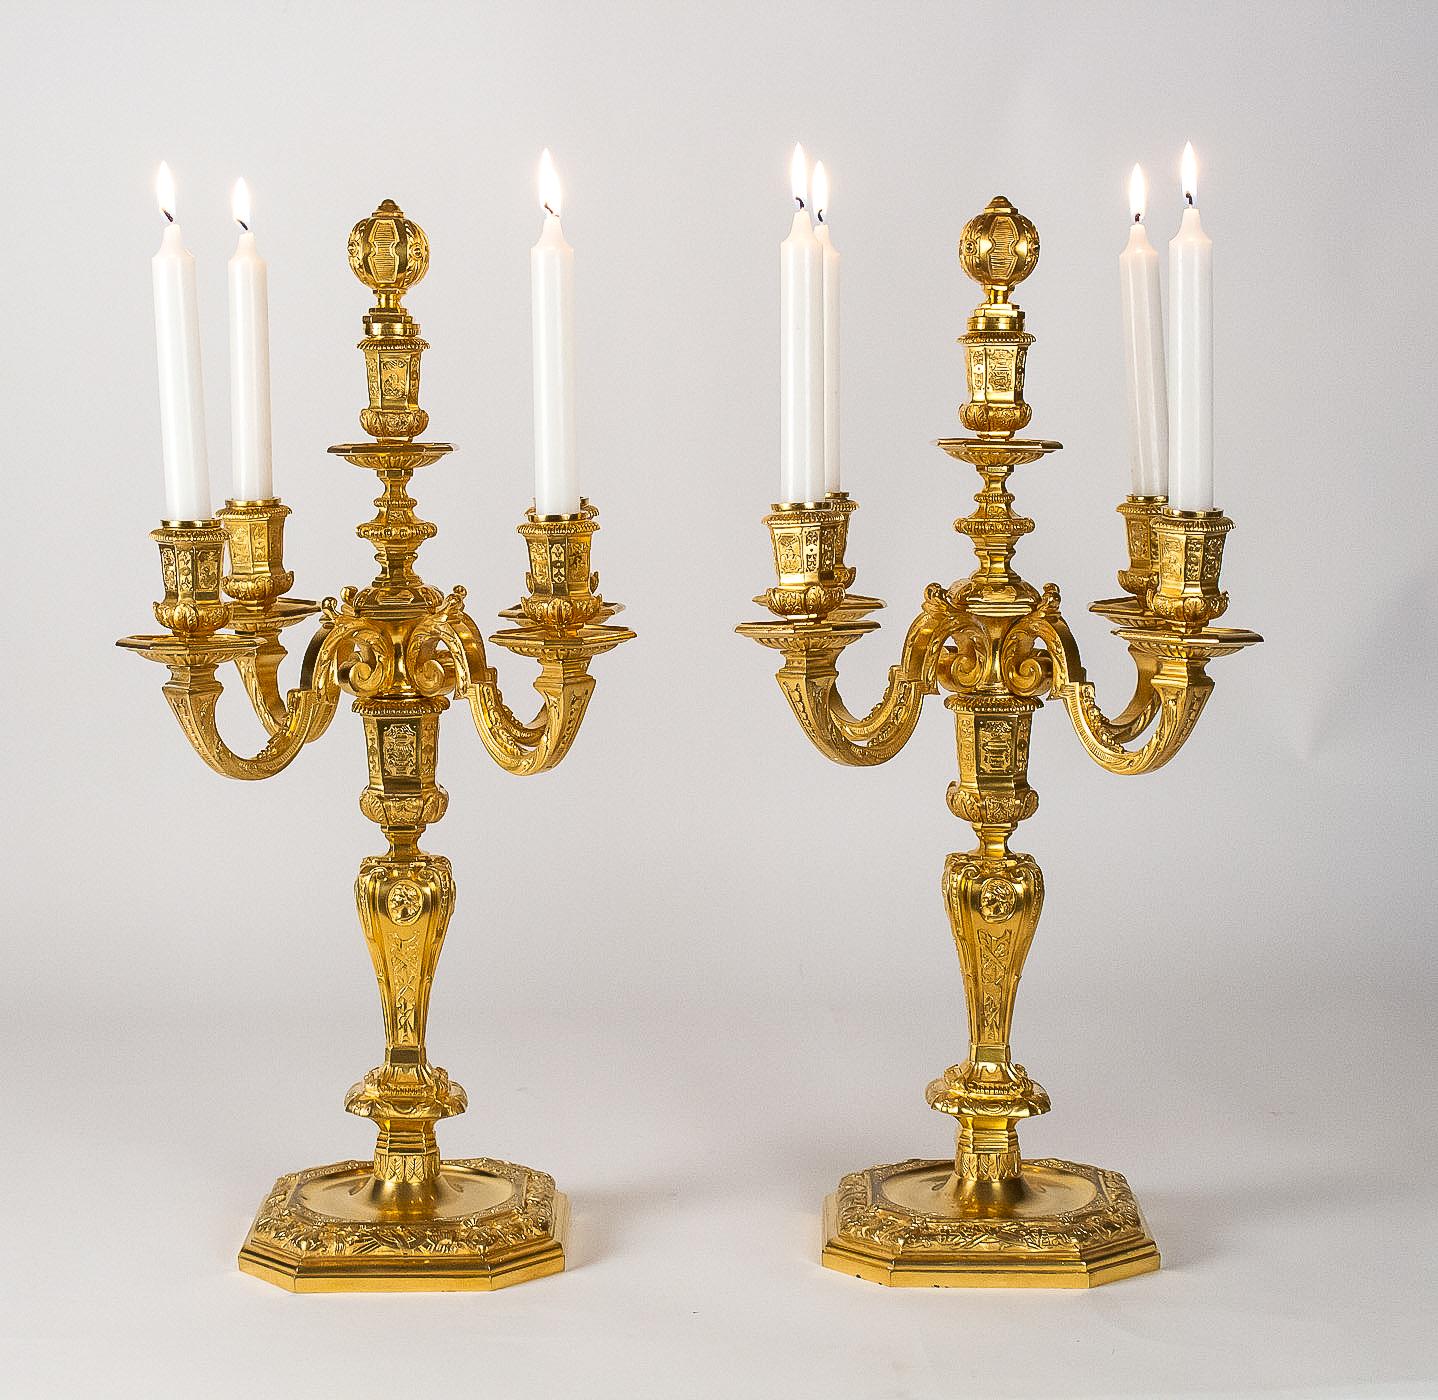 By H voisenet, Large Pair of Louis XIV style Ormolu Candelabras, circa 1880-1900 

By H. Voisenet, a large gorgeous finely chiseled gilt-bronze, pair of five-light candelabras, decorated in a classic Louis XIV Berain style with flowers of Lilies,